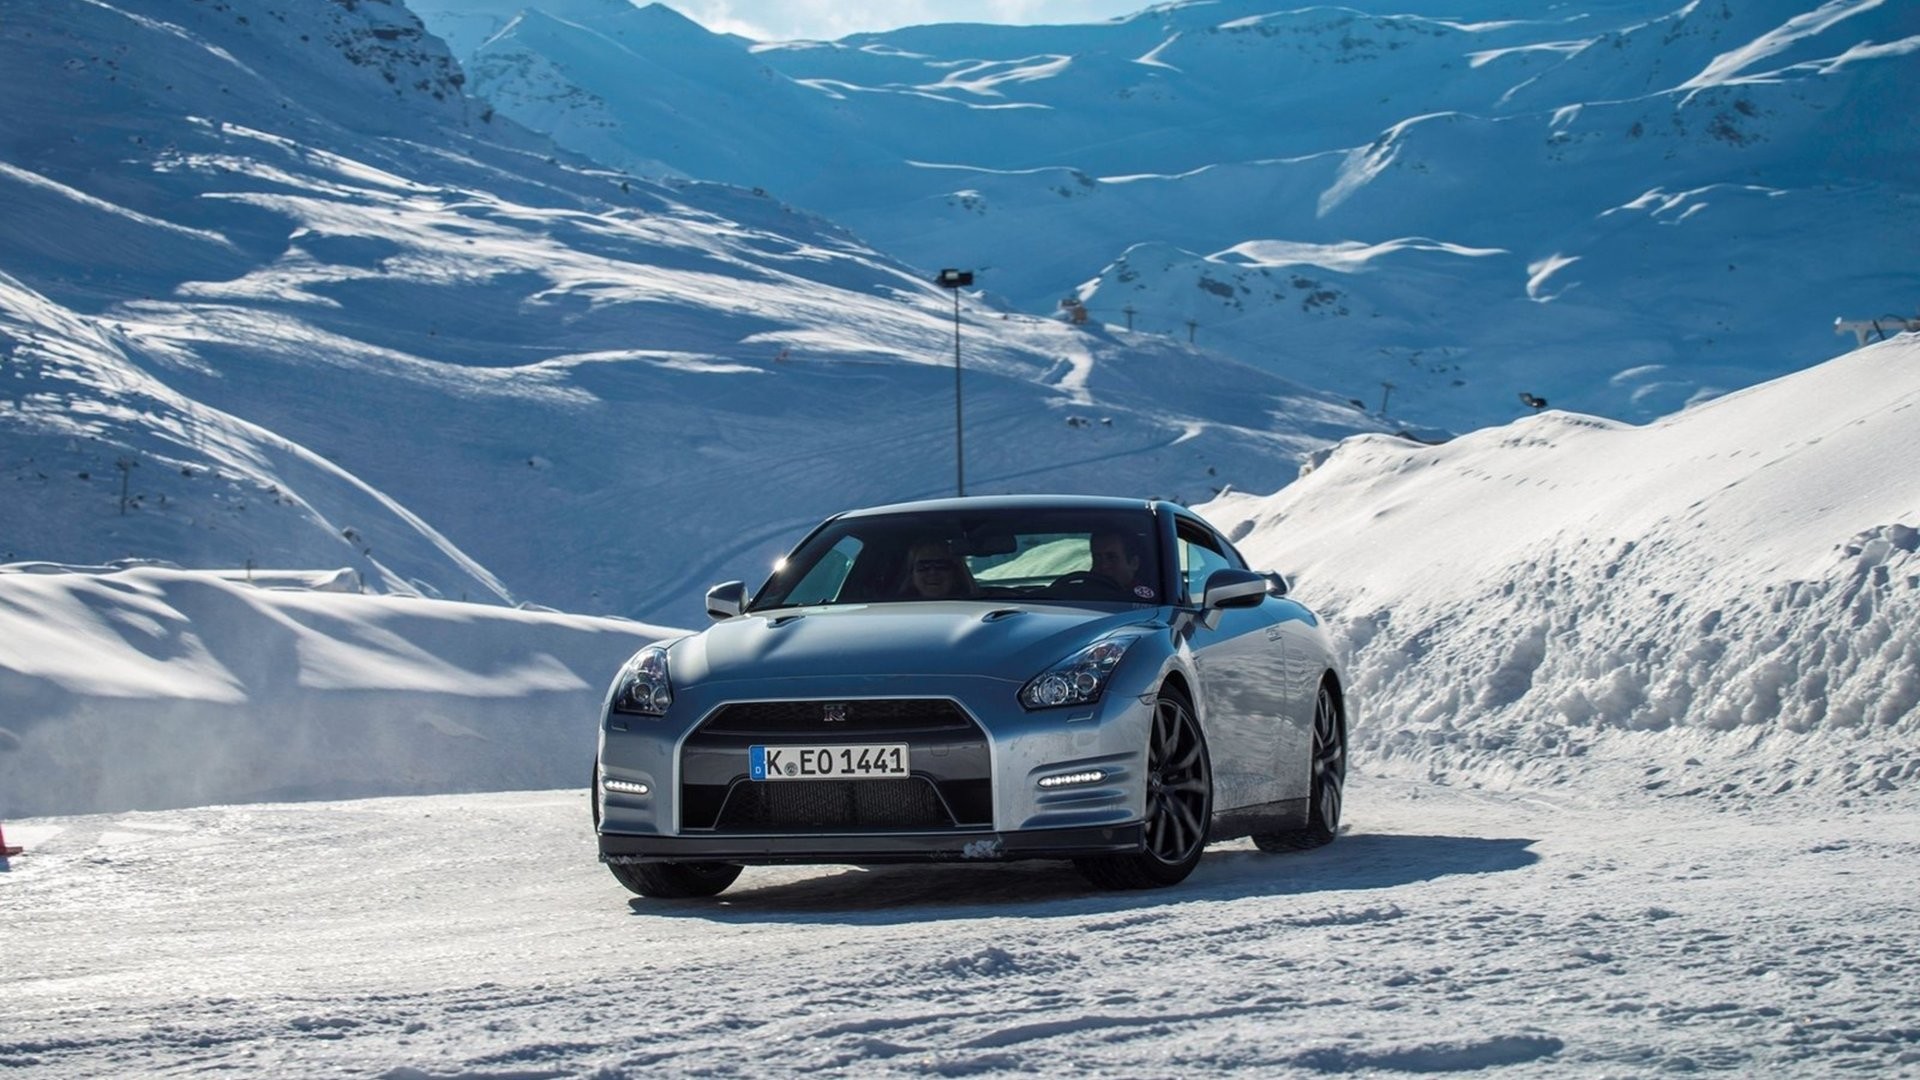 General 1920x1080 Nissan Nissan GT-R winter car snow mountains numbers vehicle Japanese cars